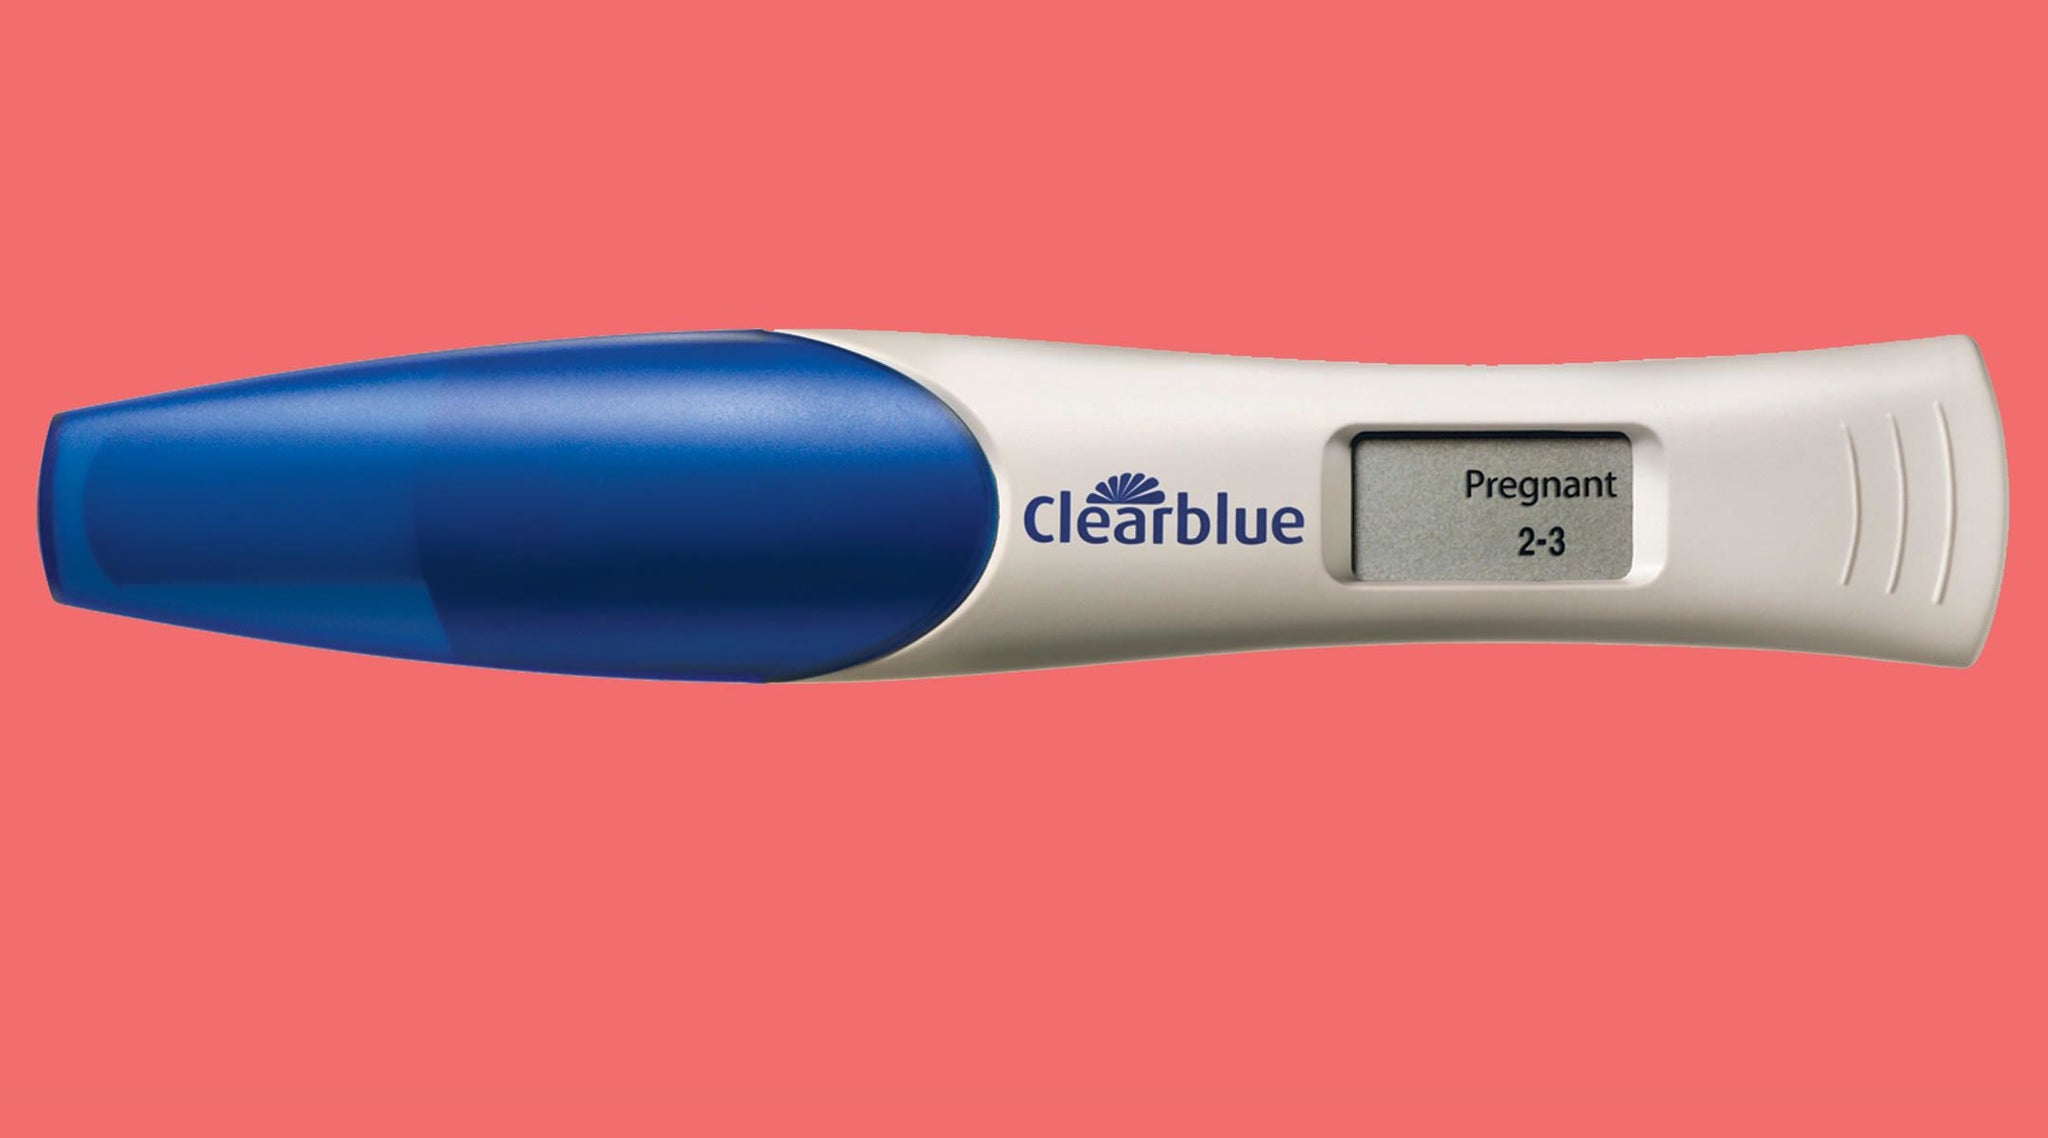 How Early Can a Clearblue Detect Pregnancy?